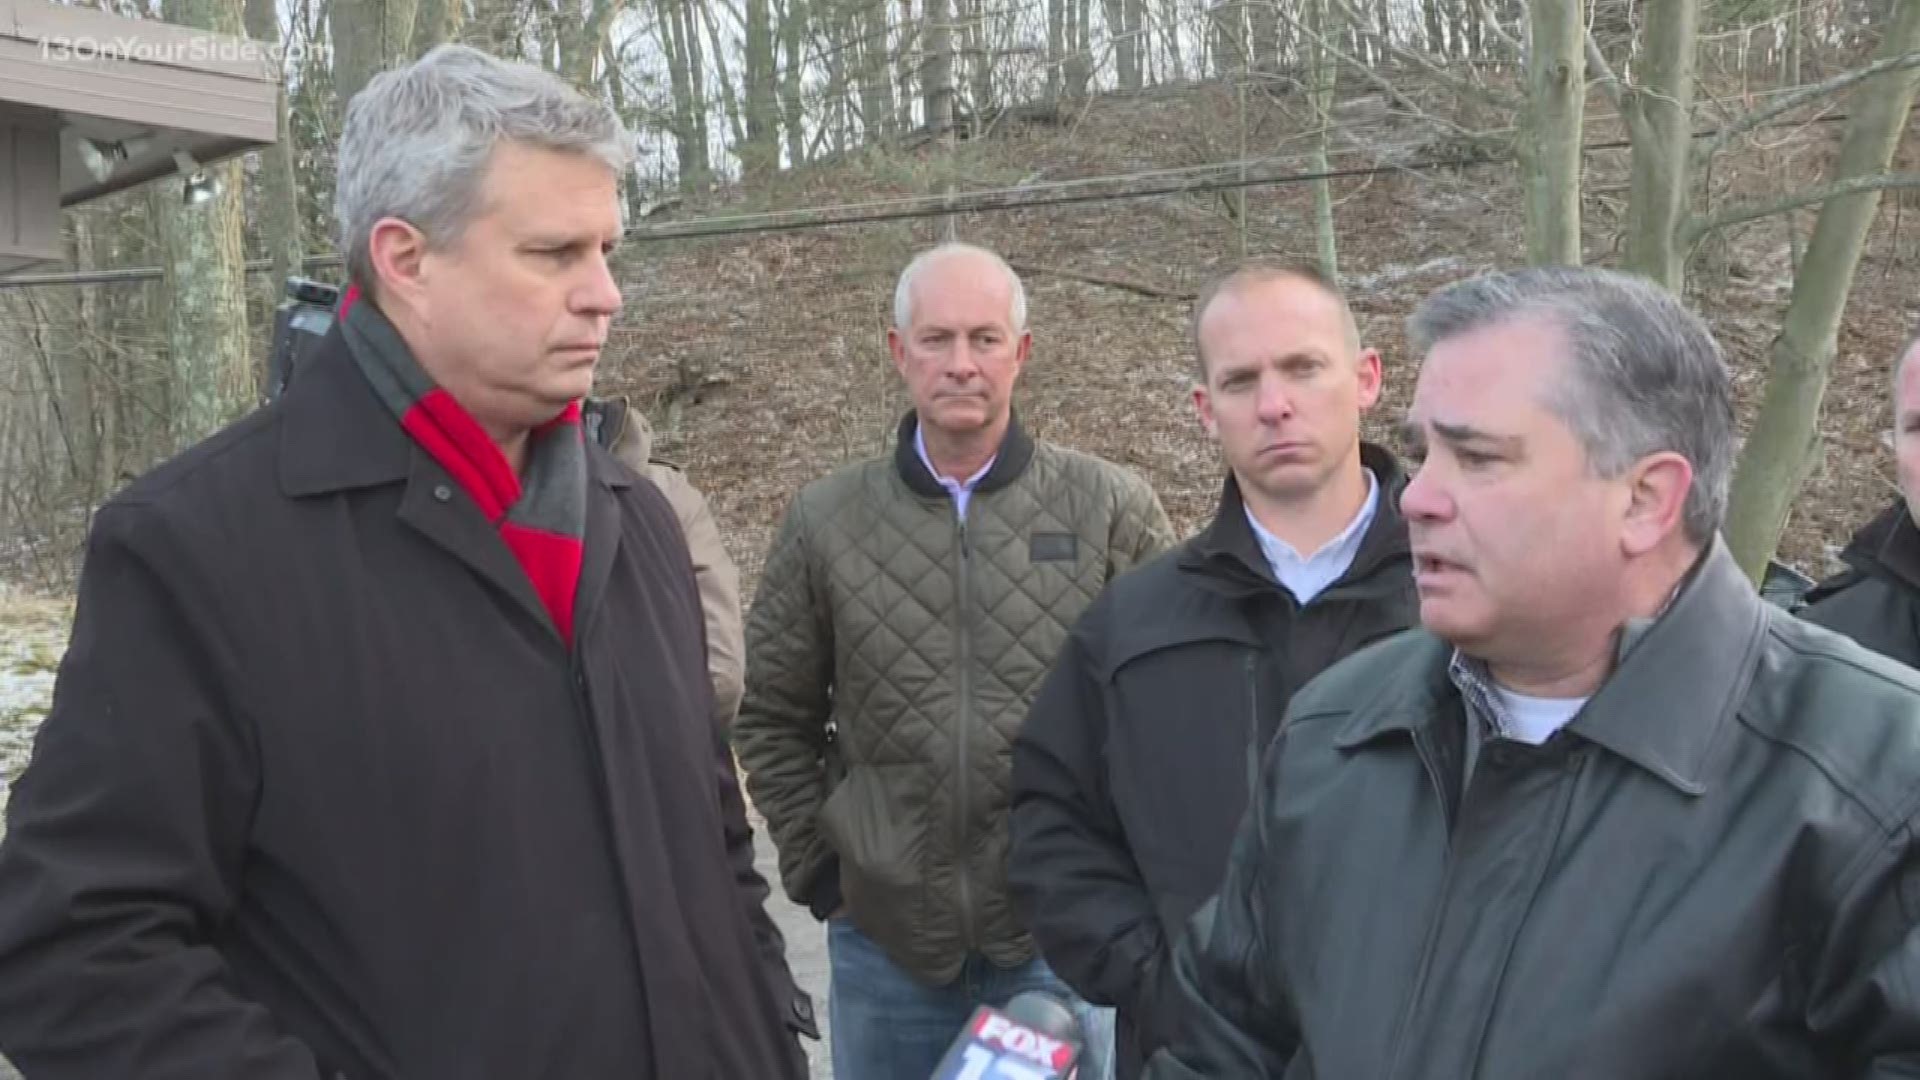 Friday, U.S. Rep. Bill Huizenga was in Spring Lake surveying lakeshore erosion in his district.